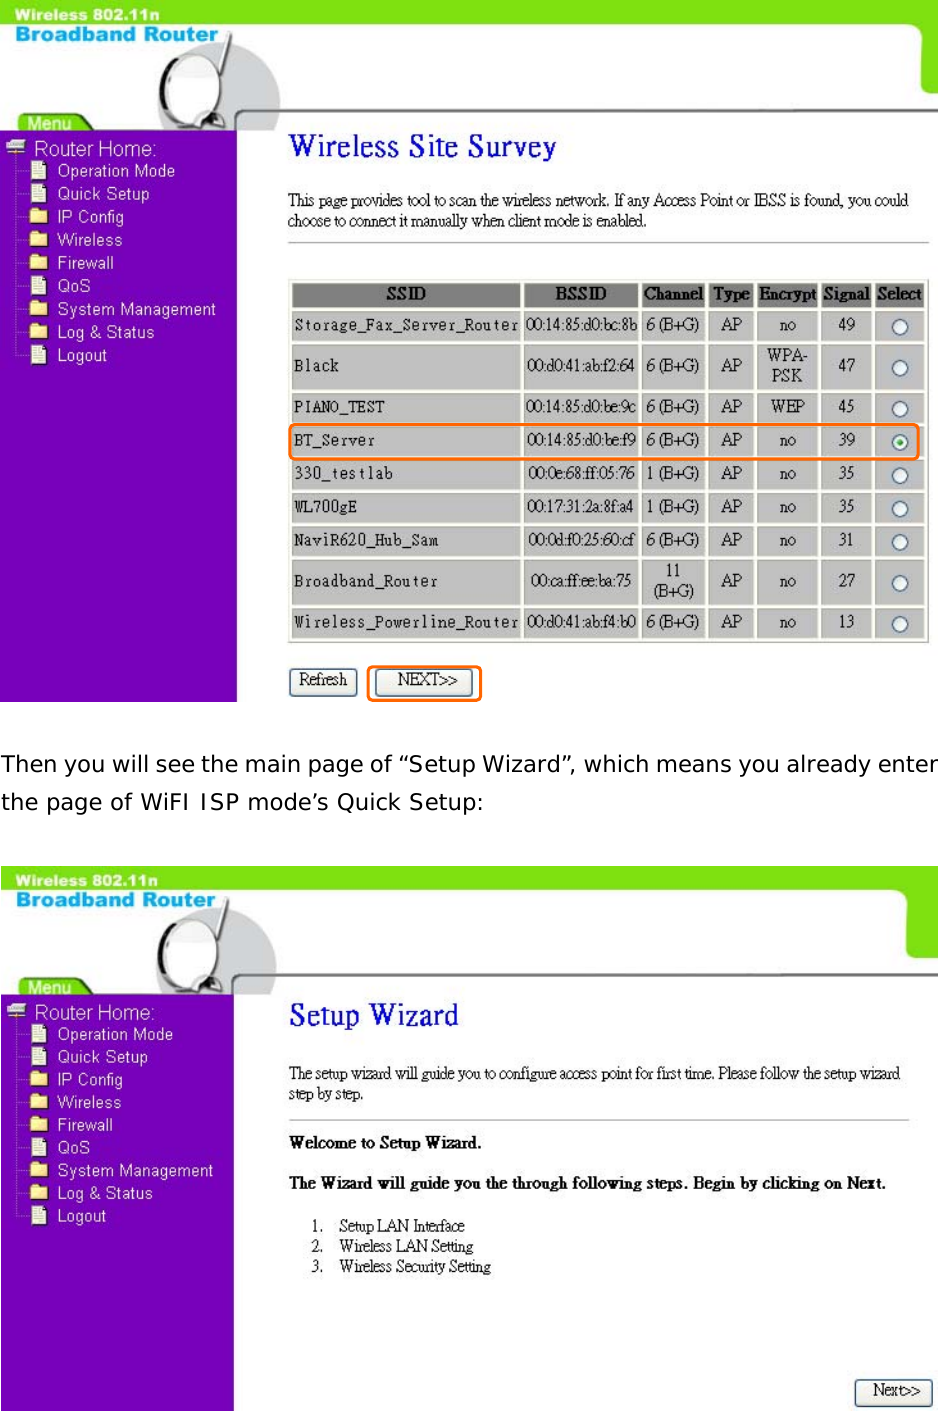   Then you will see the main page of “Setup Wizard”, which means you already enter the page of WiFI ISP mode’s Quick Setup:        